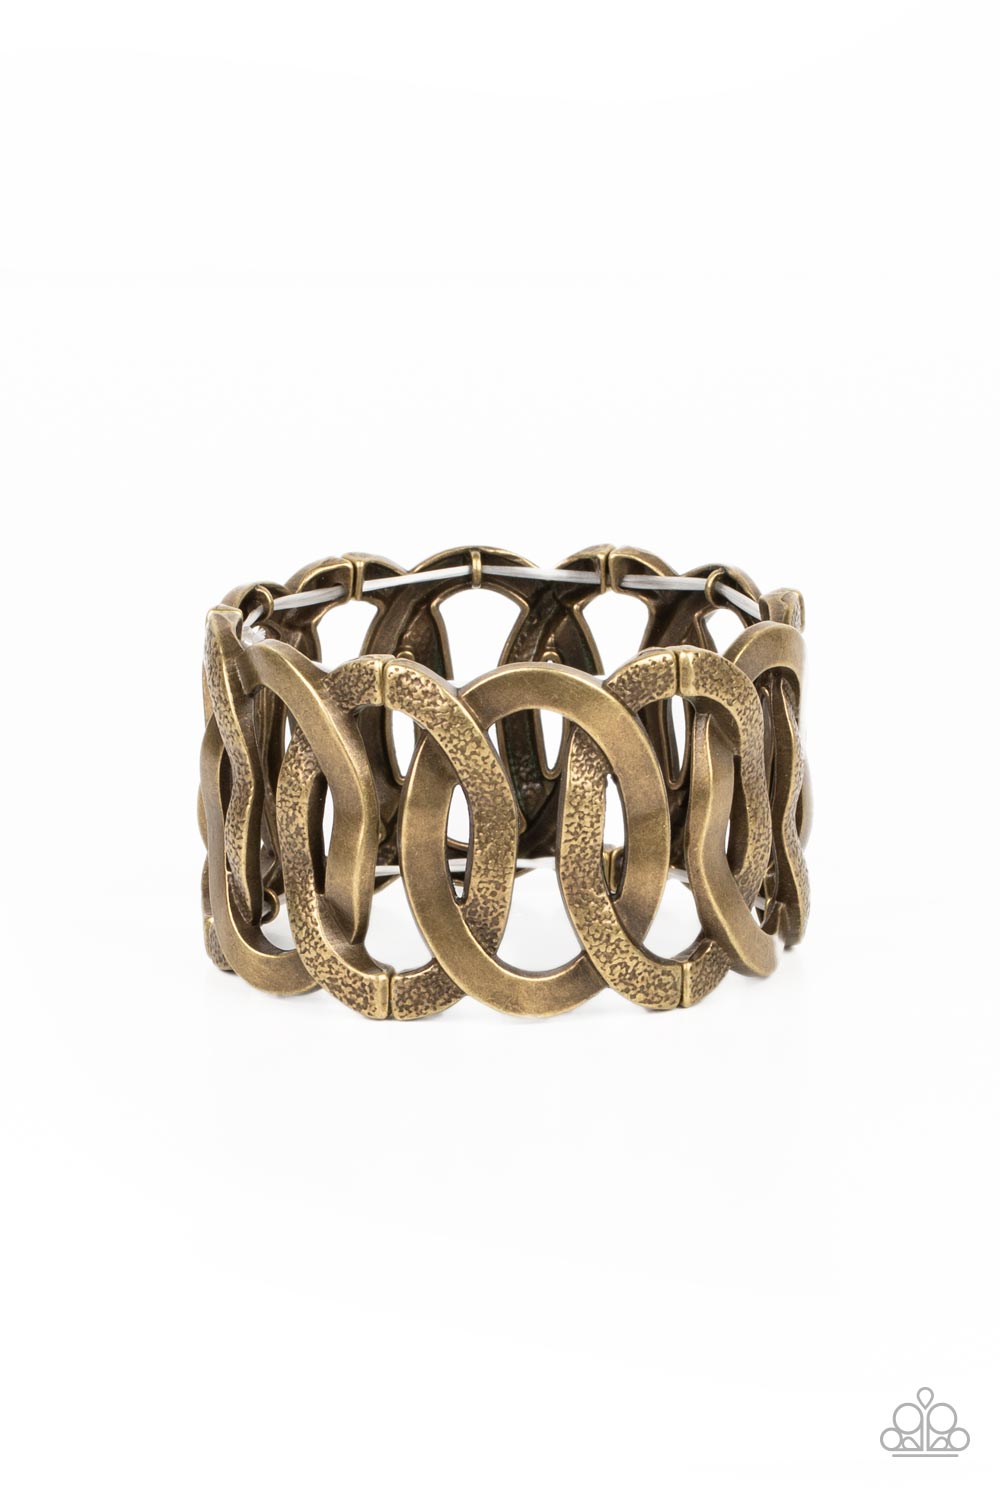 Industrial Indulgence - Brass Stretchy Bracelet - Paparazzi Accessories - Large brass hoops brushed in gritty texture alternate with smooth brass hoops featuring a high sheen finish. The oversized links overlap as they alternate around the wrist on stretchy bands, culminating in an industrial statement piece. Sold as one individual bracelet.